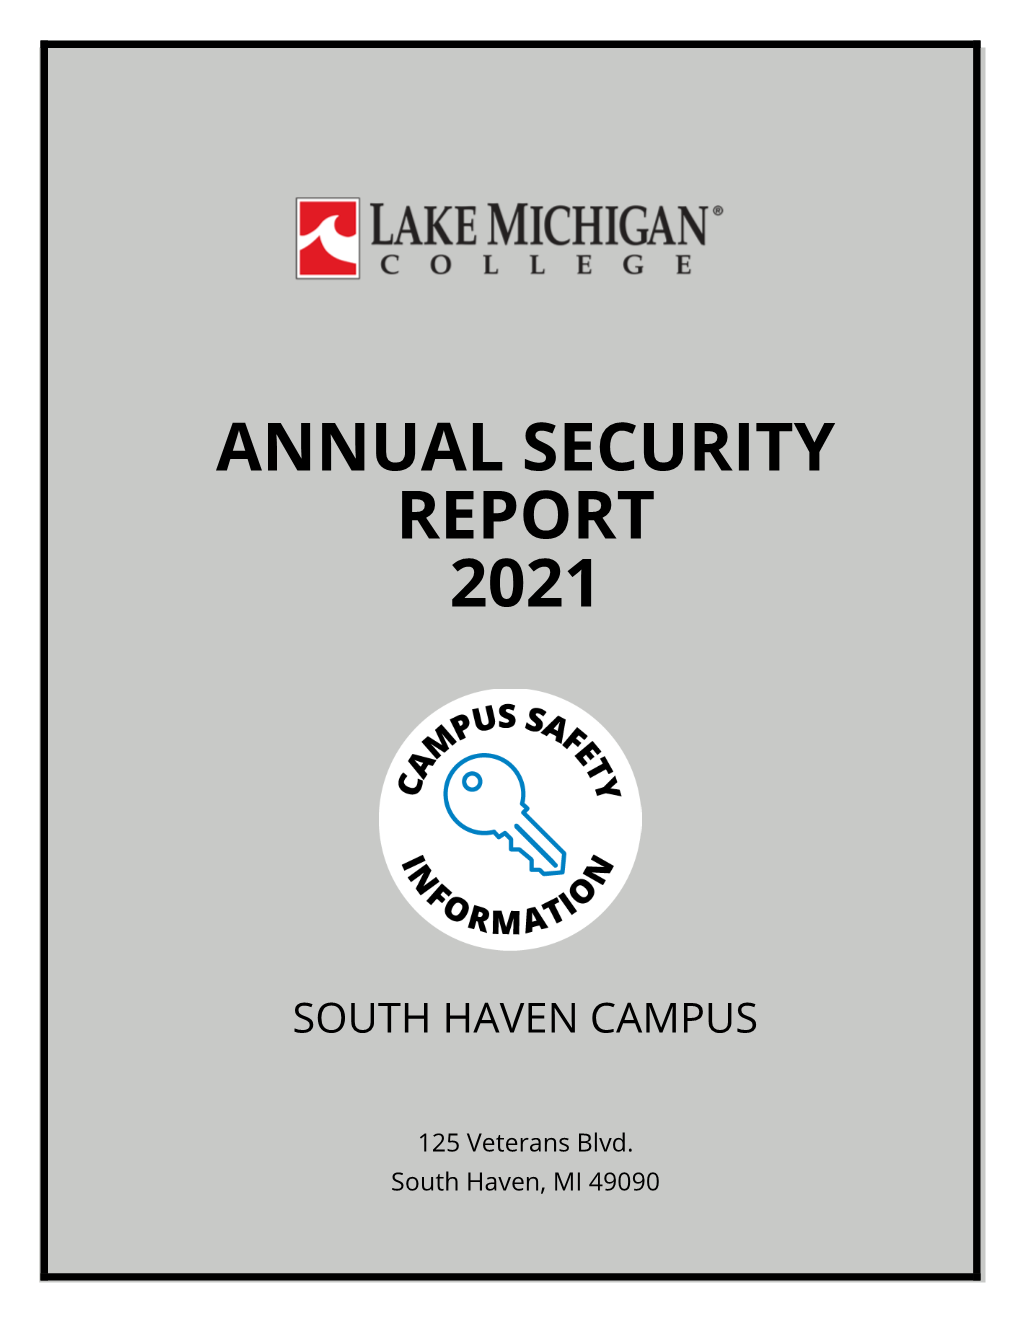 South Haven Campus Annual Security Report